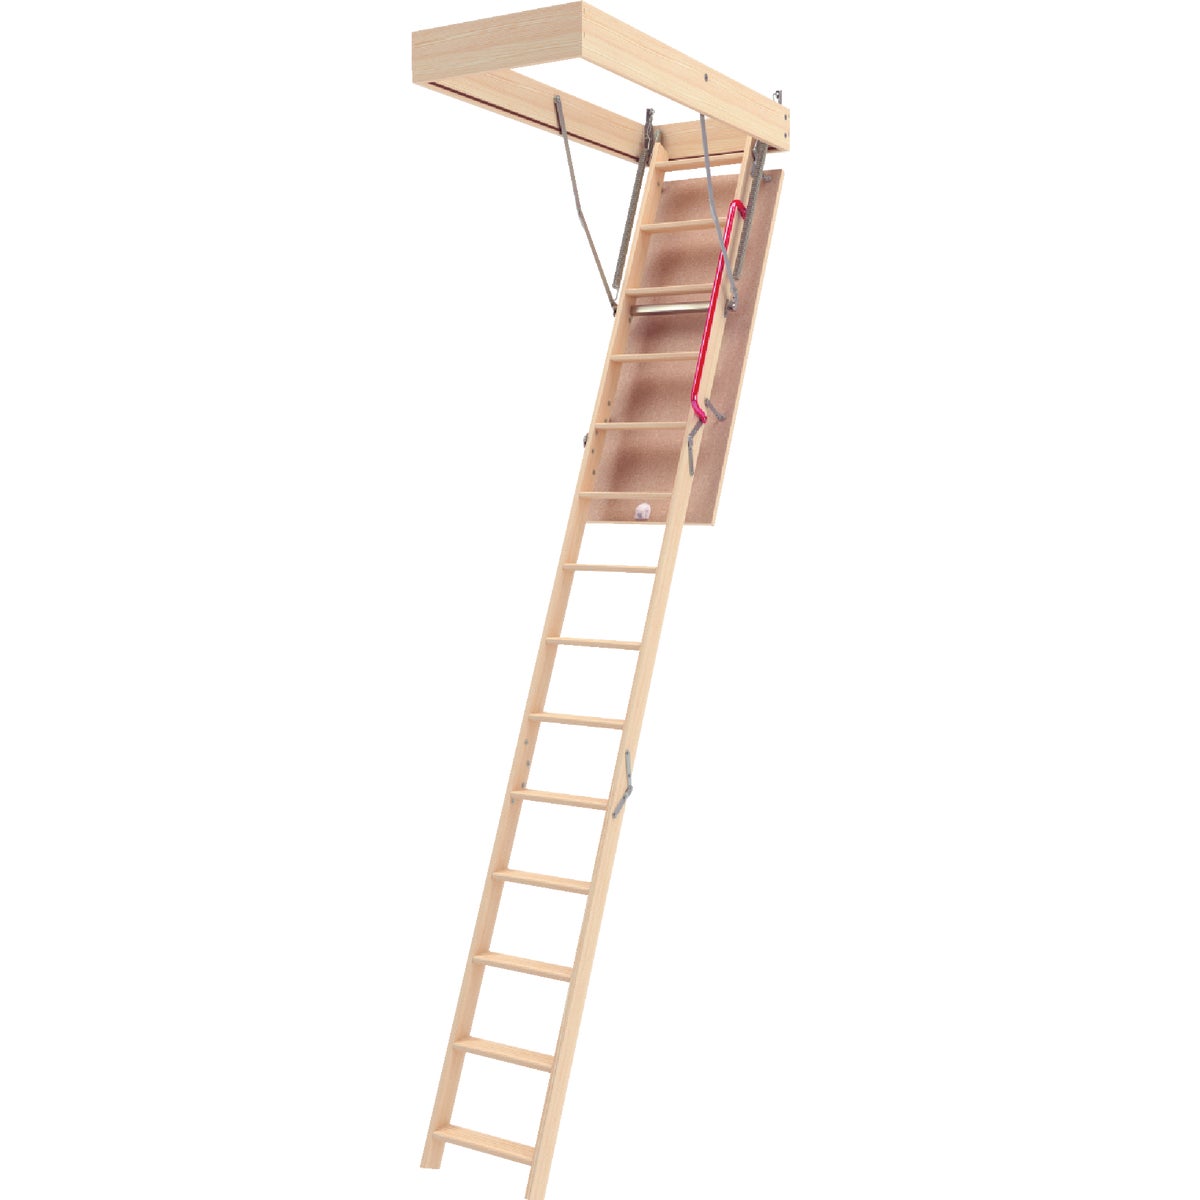 Fakro 7 Ft. 10 In. to 10 Ft. 1 In. 25 In. x 54 In. Wood Attic Stairs, 350 Lb. Load